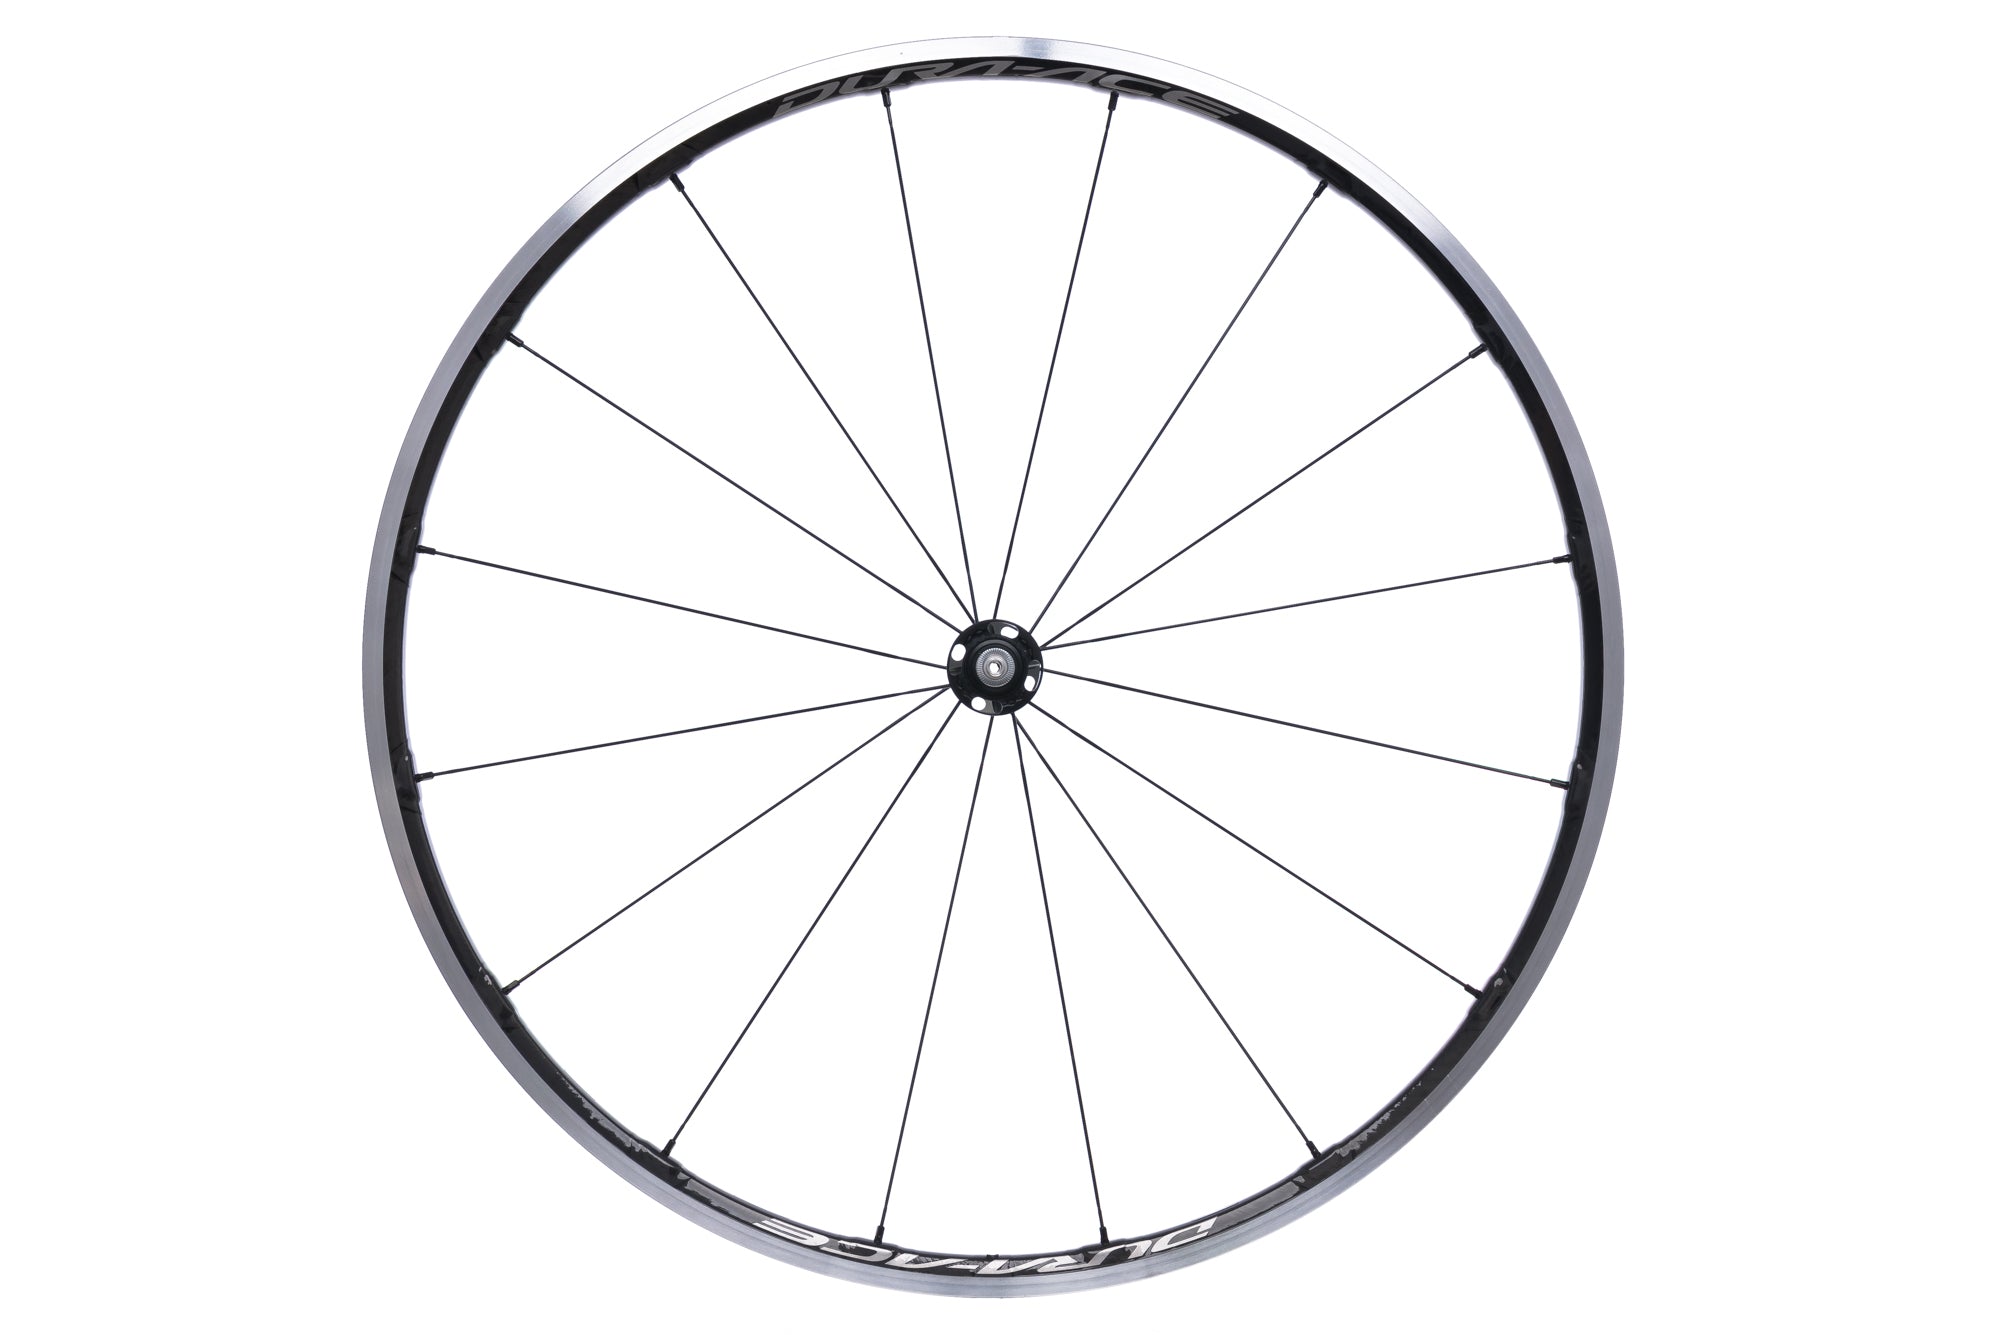 Shimano Dura Ace Carbon Alloy Clincher 700c Front Wheel drive side